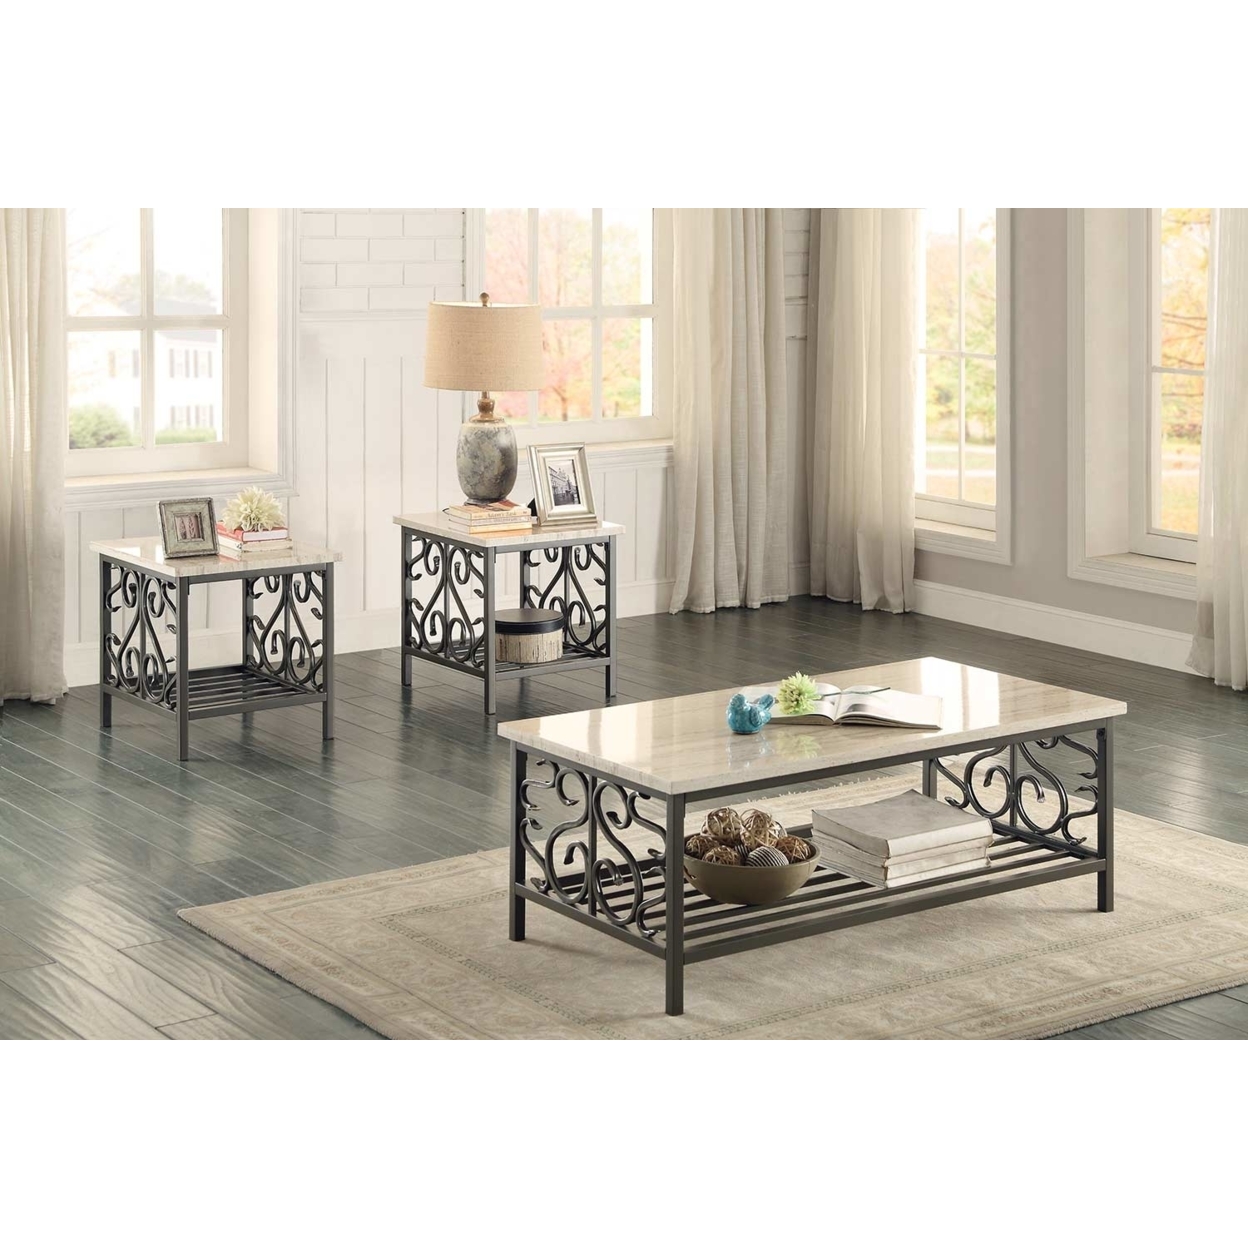 3 Piece Faux Marble Top Table Set With Decorative Metal Frame, Cream & Gray- Saltoro Sherpi